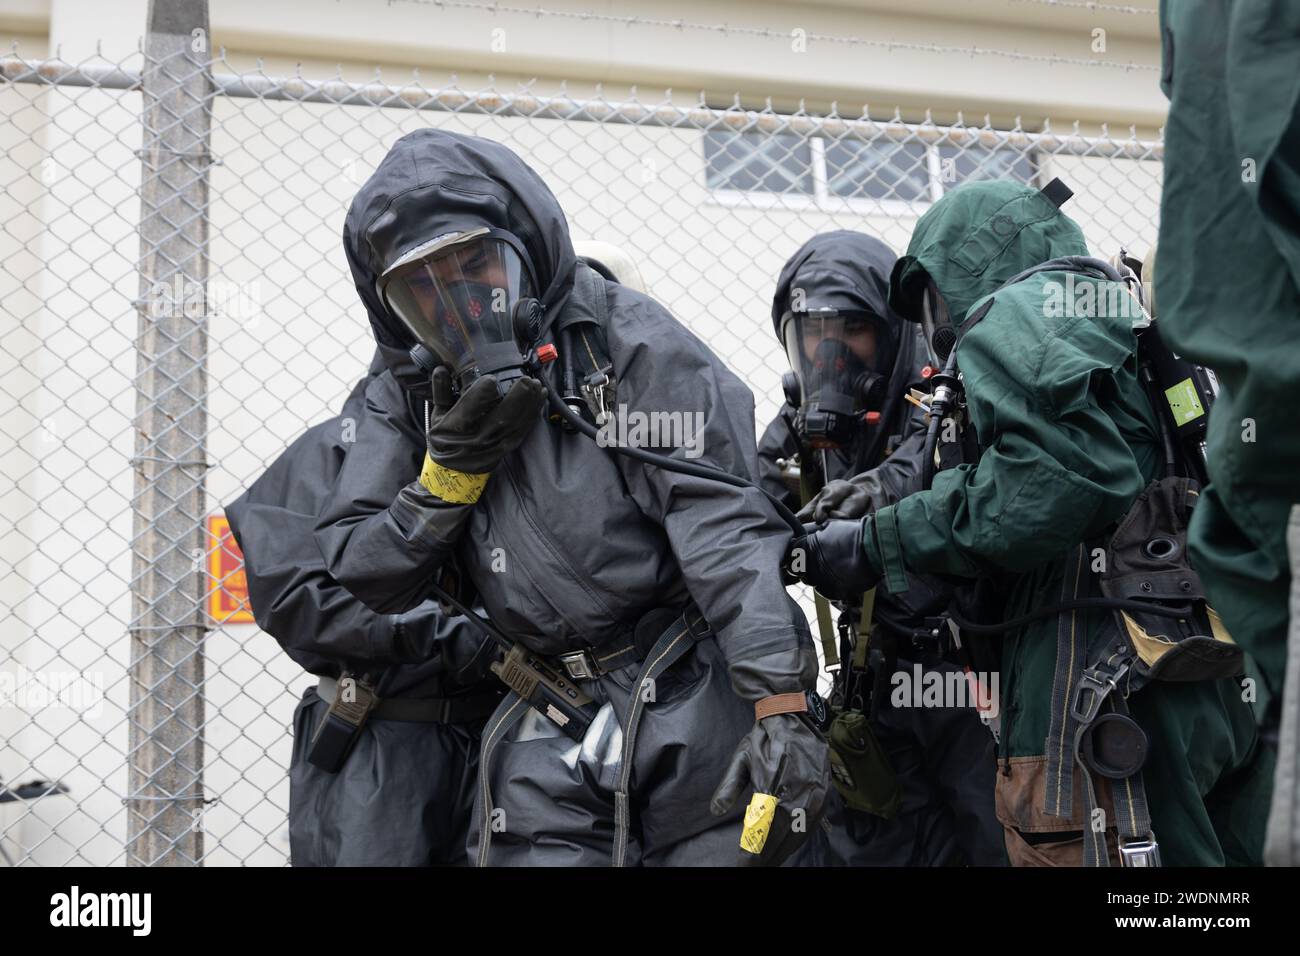 U.S. Marine Corps chemical, biological, radioactive, and nuclear defense specialists with the command element, 31st Marine Expeditionary Unit, conduct simulated decontamination during a chemical response exercise at Camp Hansen, Okinawa, Japan, Jan. 17, 2024. CREEX tests CBRN’s capabilities to respond to different operations, including clandestine labs, containing chemical munitions, and countering weapons of mass destruction while performing reconnaissance, decontamination, and rapid insertion for casualties. The 31st MEU, the Marine Corps’ only continuously forward-deployed MEU, provides a f Stock Photo